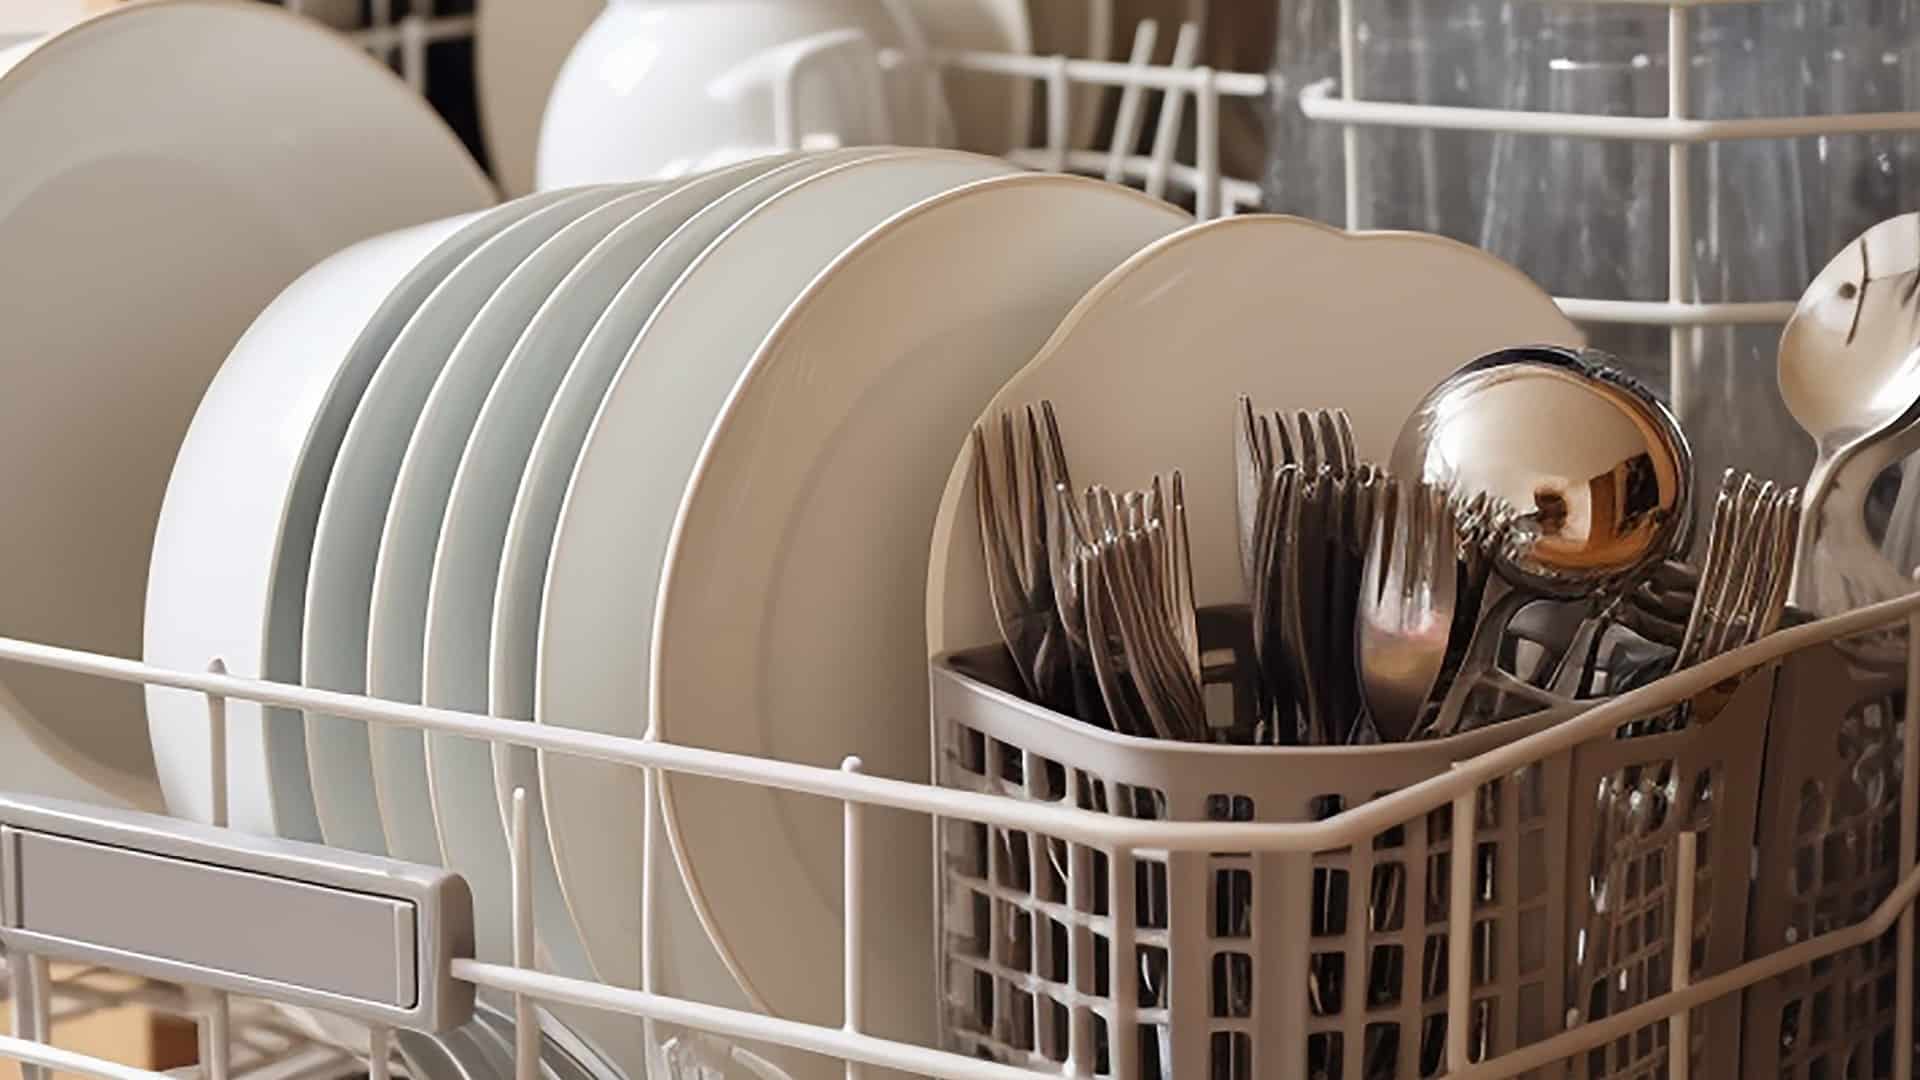 Featured image for “13 Things to Never Put in the Dishwasher”